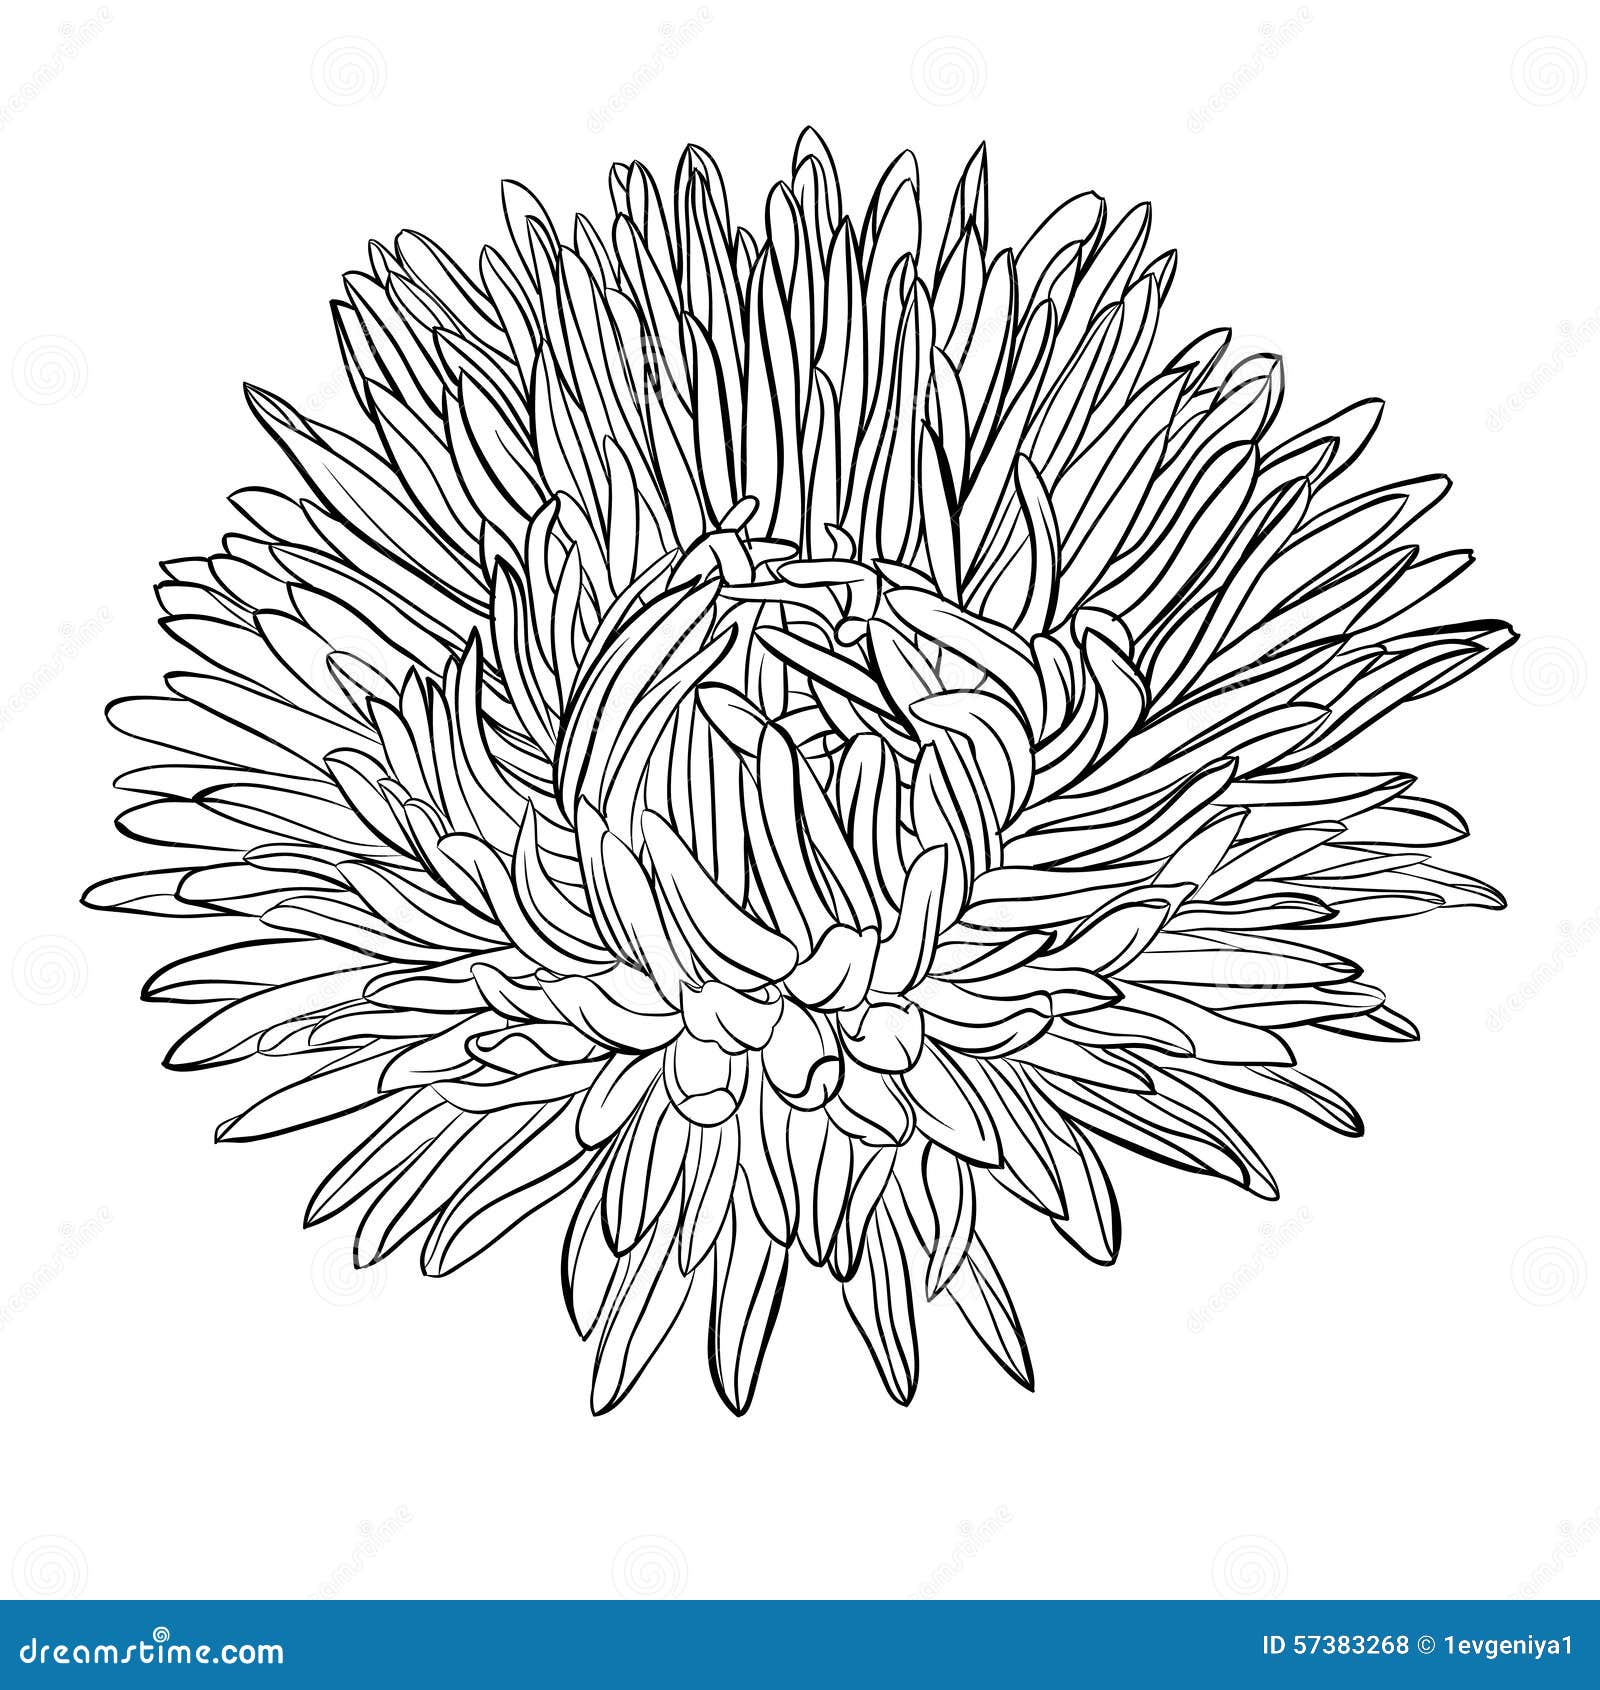 Beautiful Monochrome Black And White Aster Flower Isolated Illustration 57383268 Megapixl,Poison Ivy Leaf